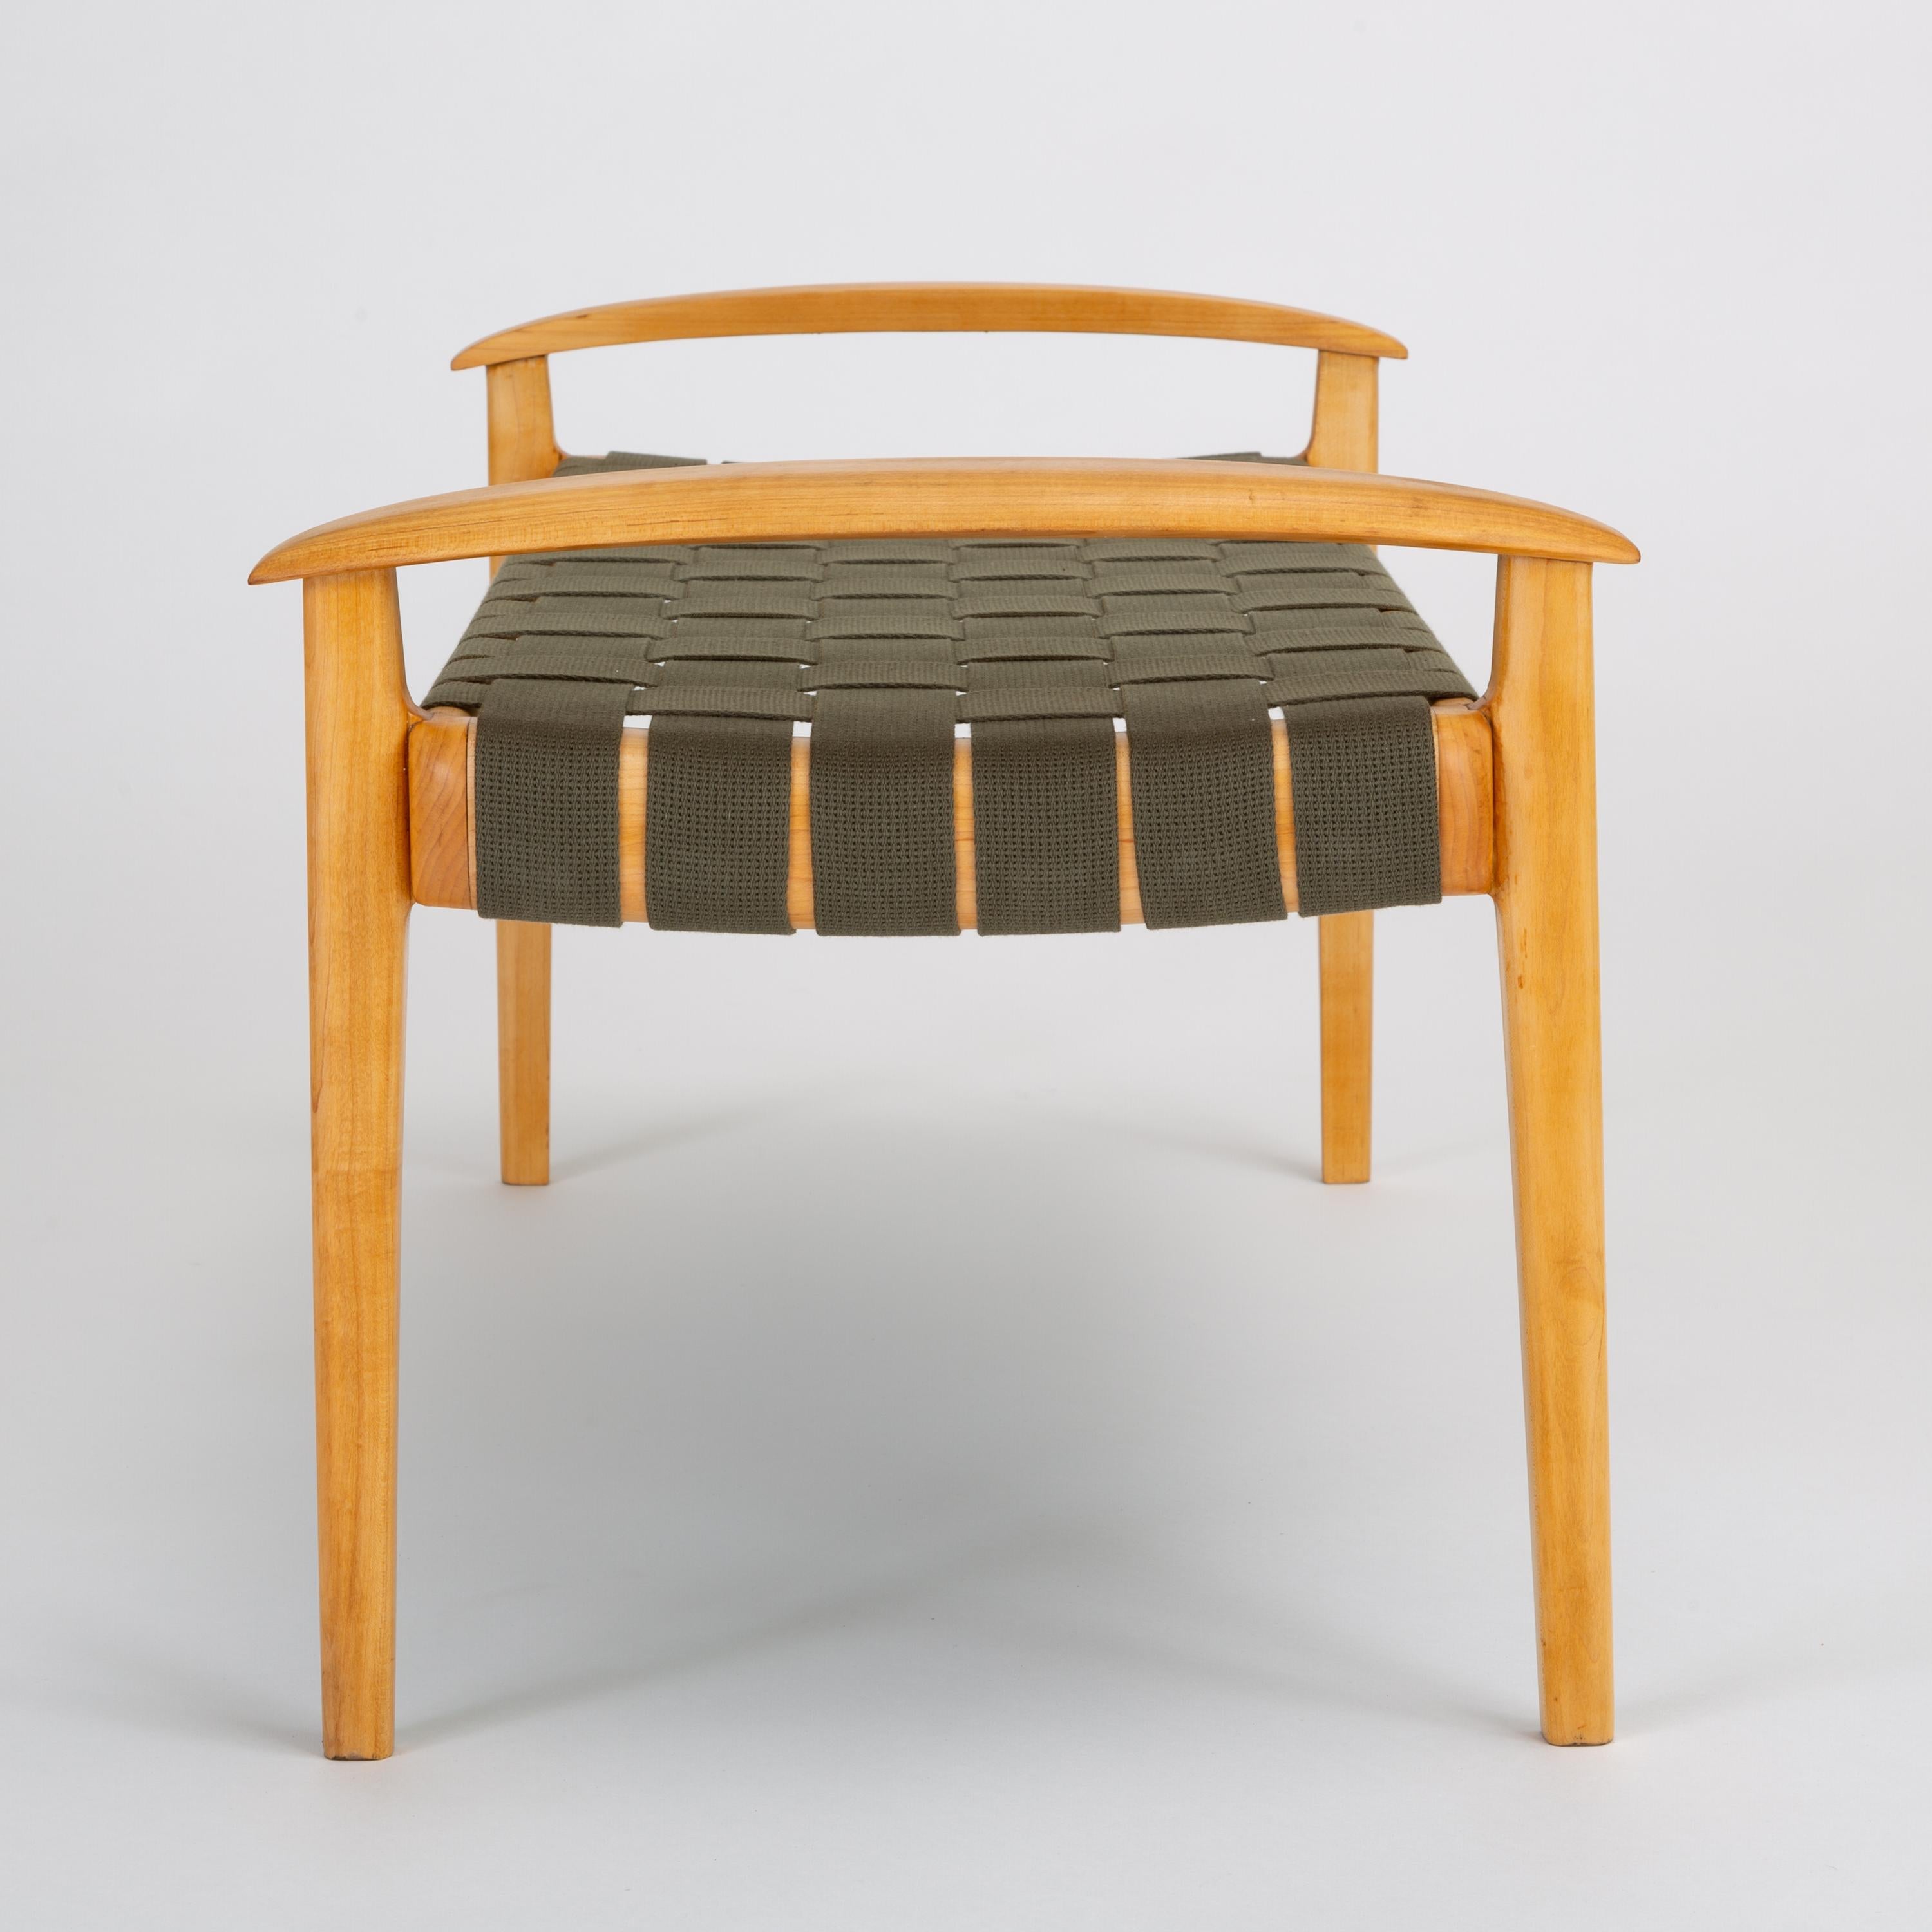 American-Made Maple Bench with Woven Seat by Tom Ghilarducci 3